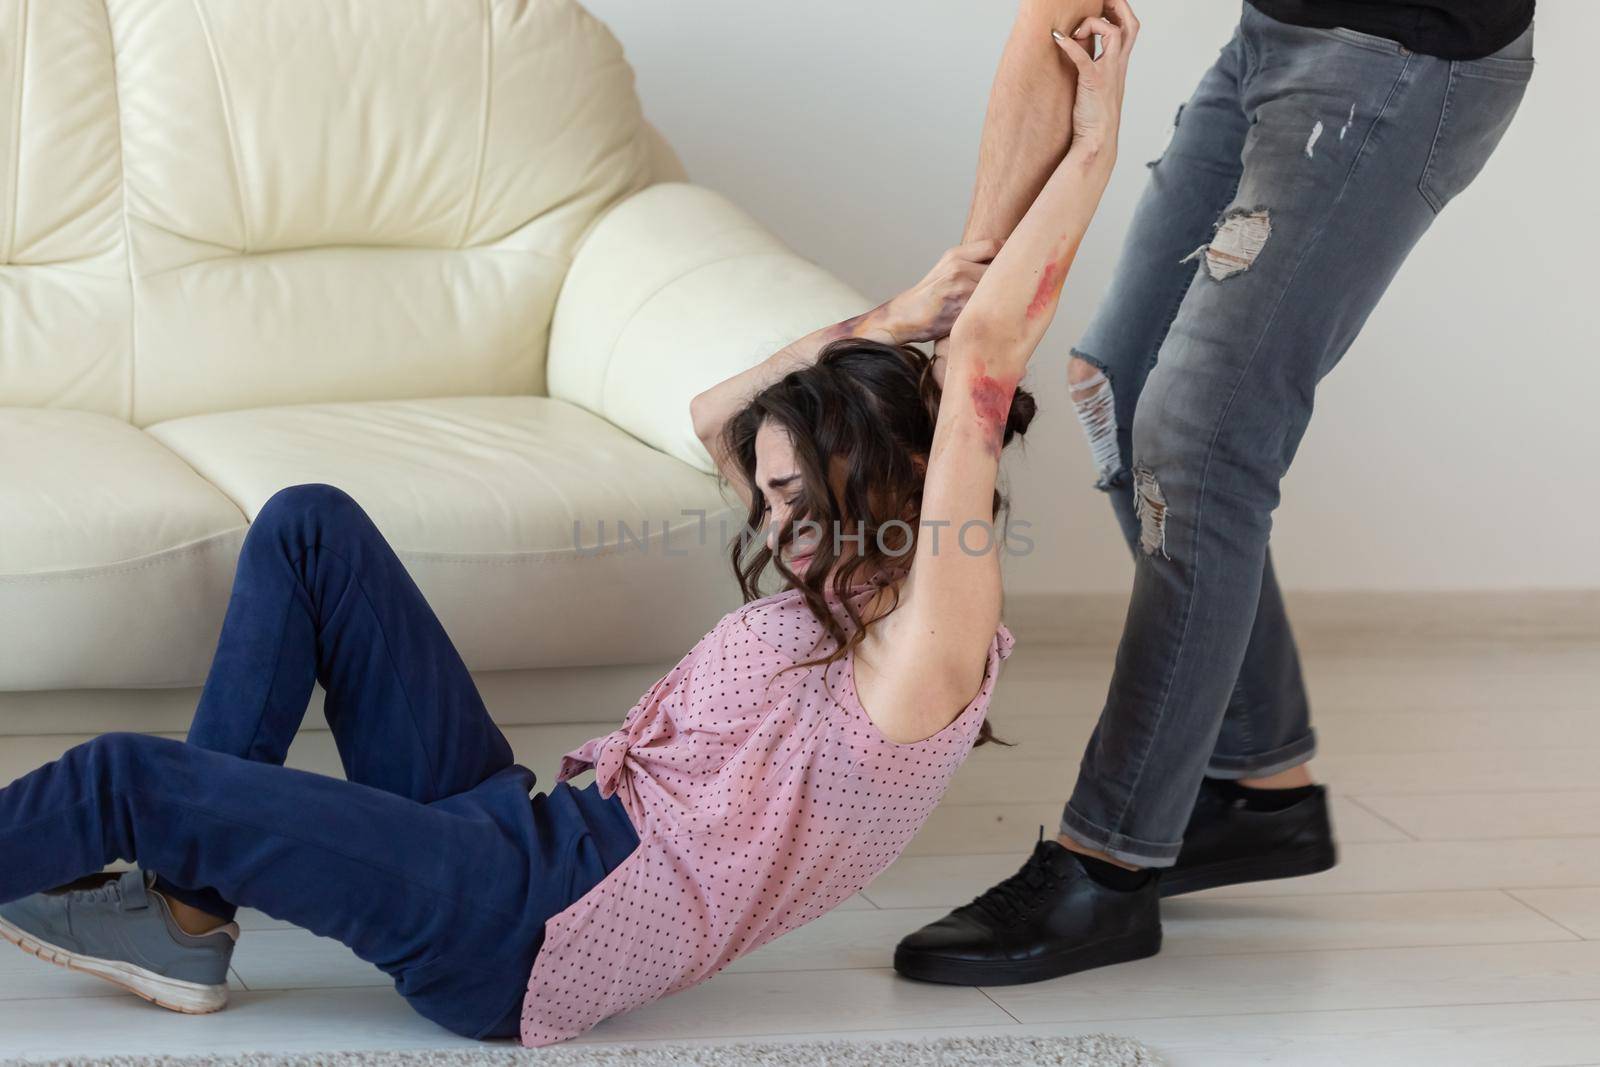 domestic violence, victim and abuse concept - couple having fight and man dragging helpless woman by hair.